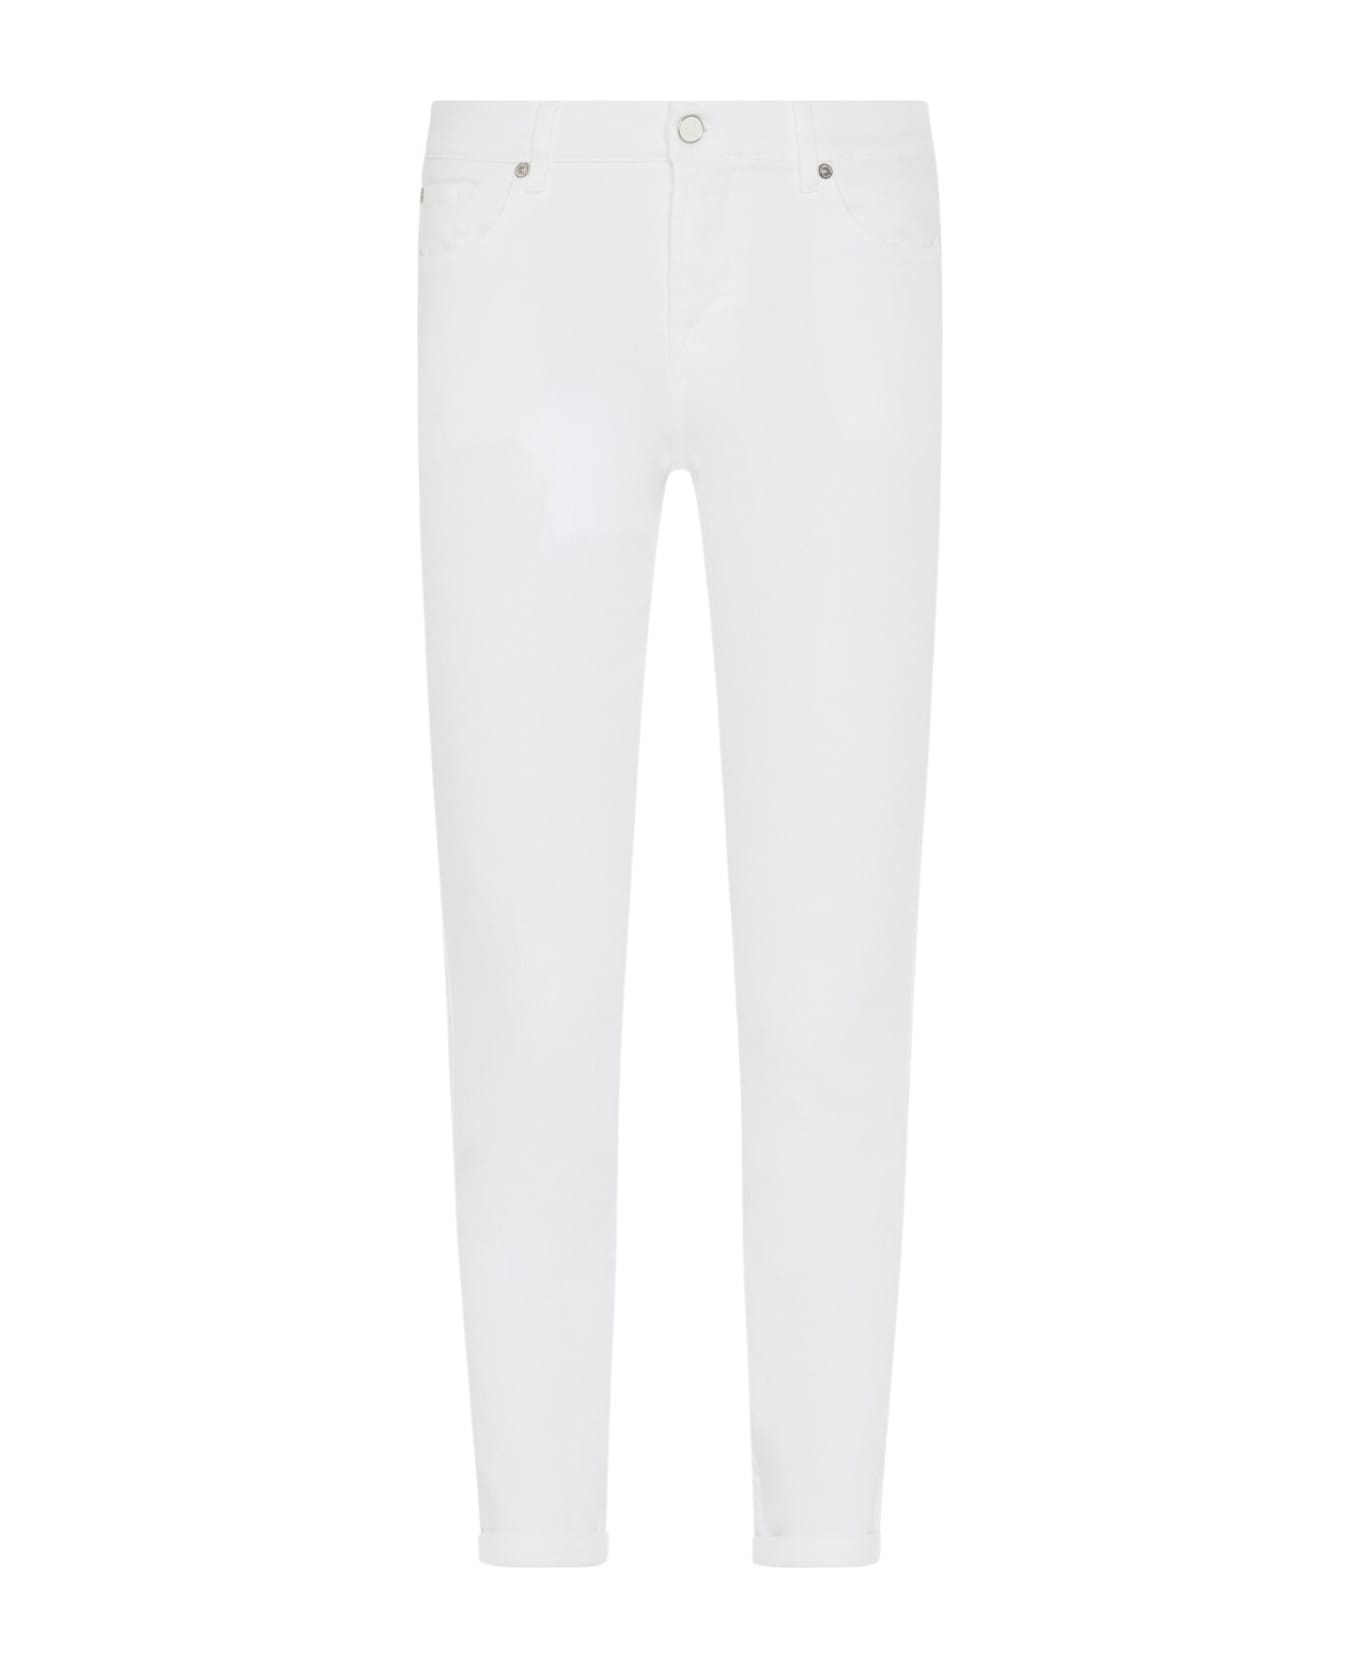 7 For All Mankind Josefina Luxe Vintage Soleil - White